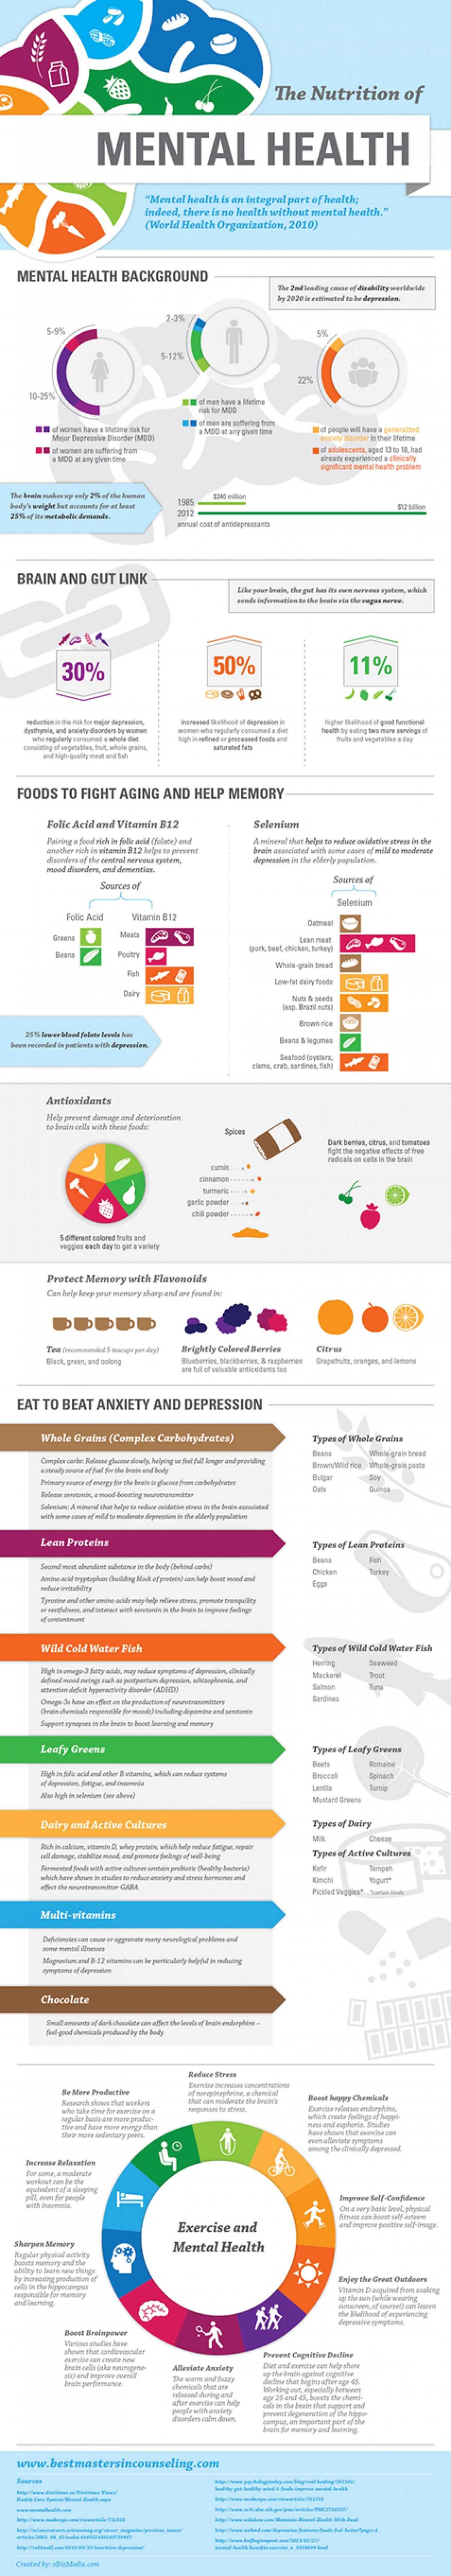 The Nutrition Of Mental Health 46 Health Infographics That You Wish You Knew Years Ago 8392